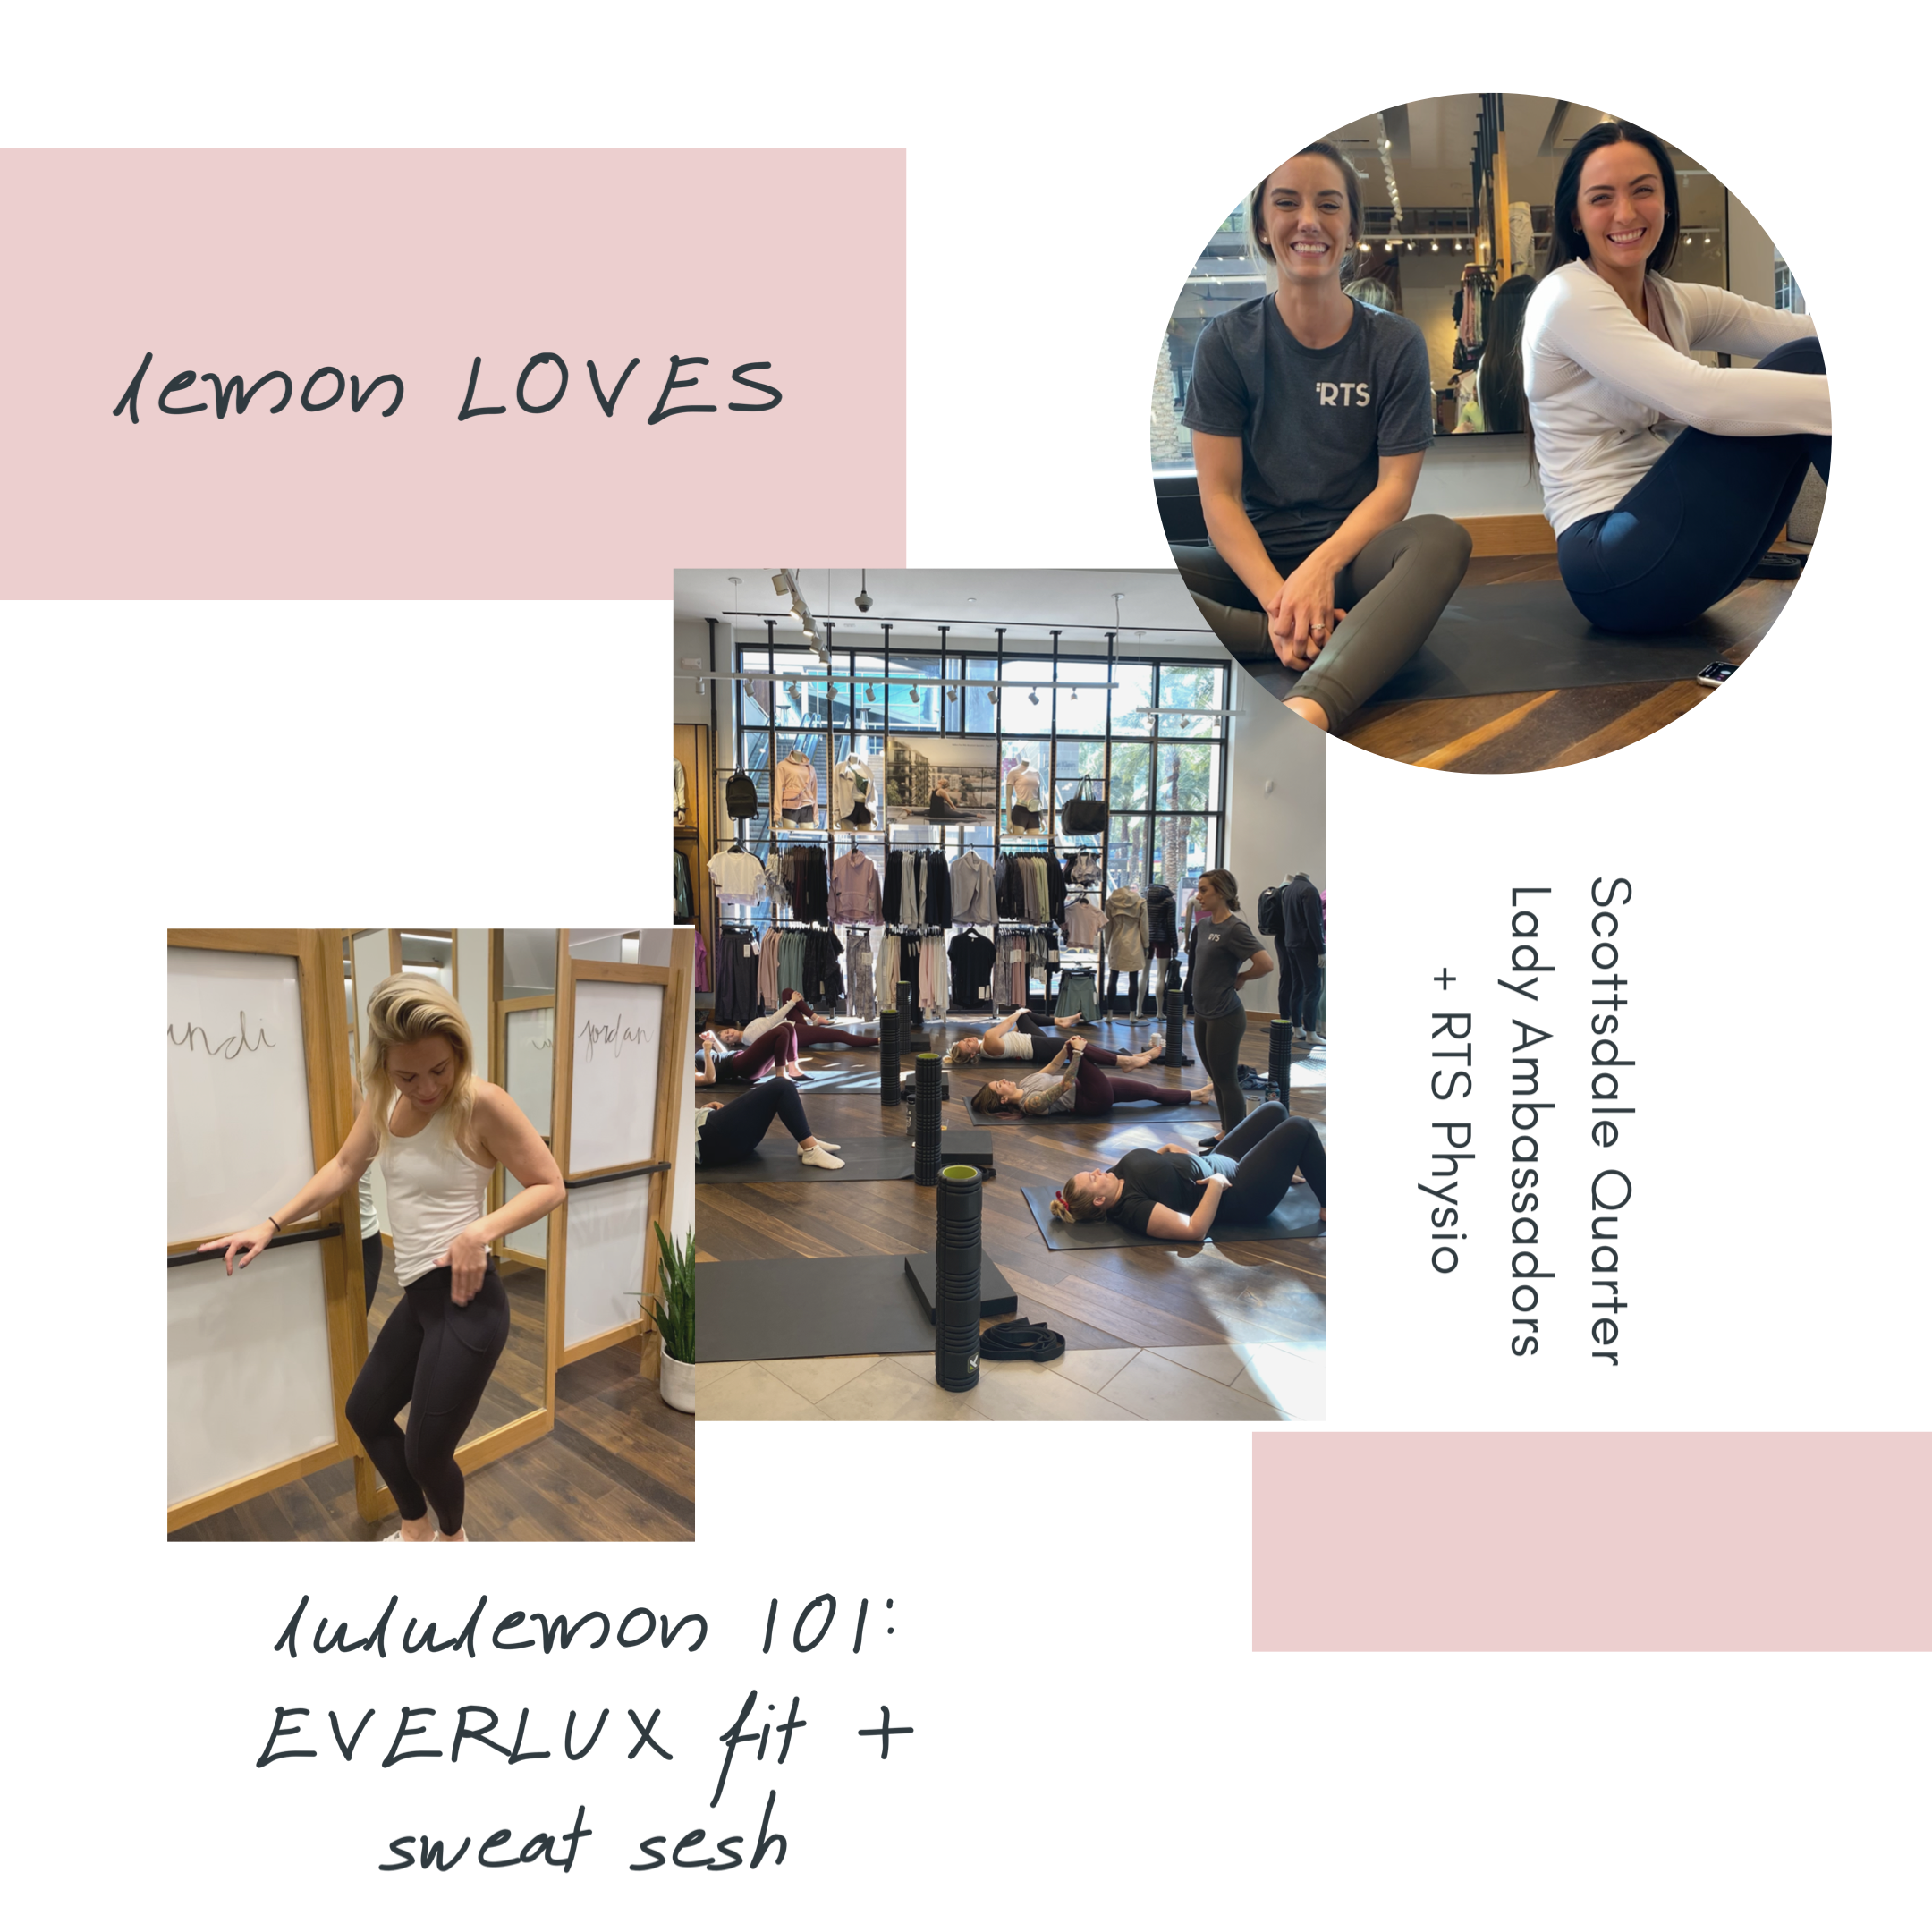 lululemon fit review tryon everlux movement mobility wunder train  invigorate tight lemon loves blog — Be Foxy Fit - improve mobility, relieve  tension, reduce stress through mindful movement